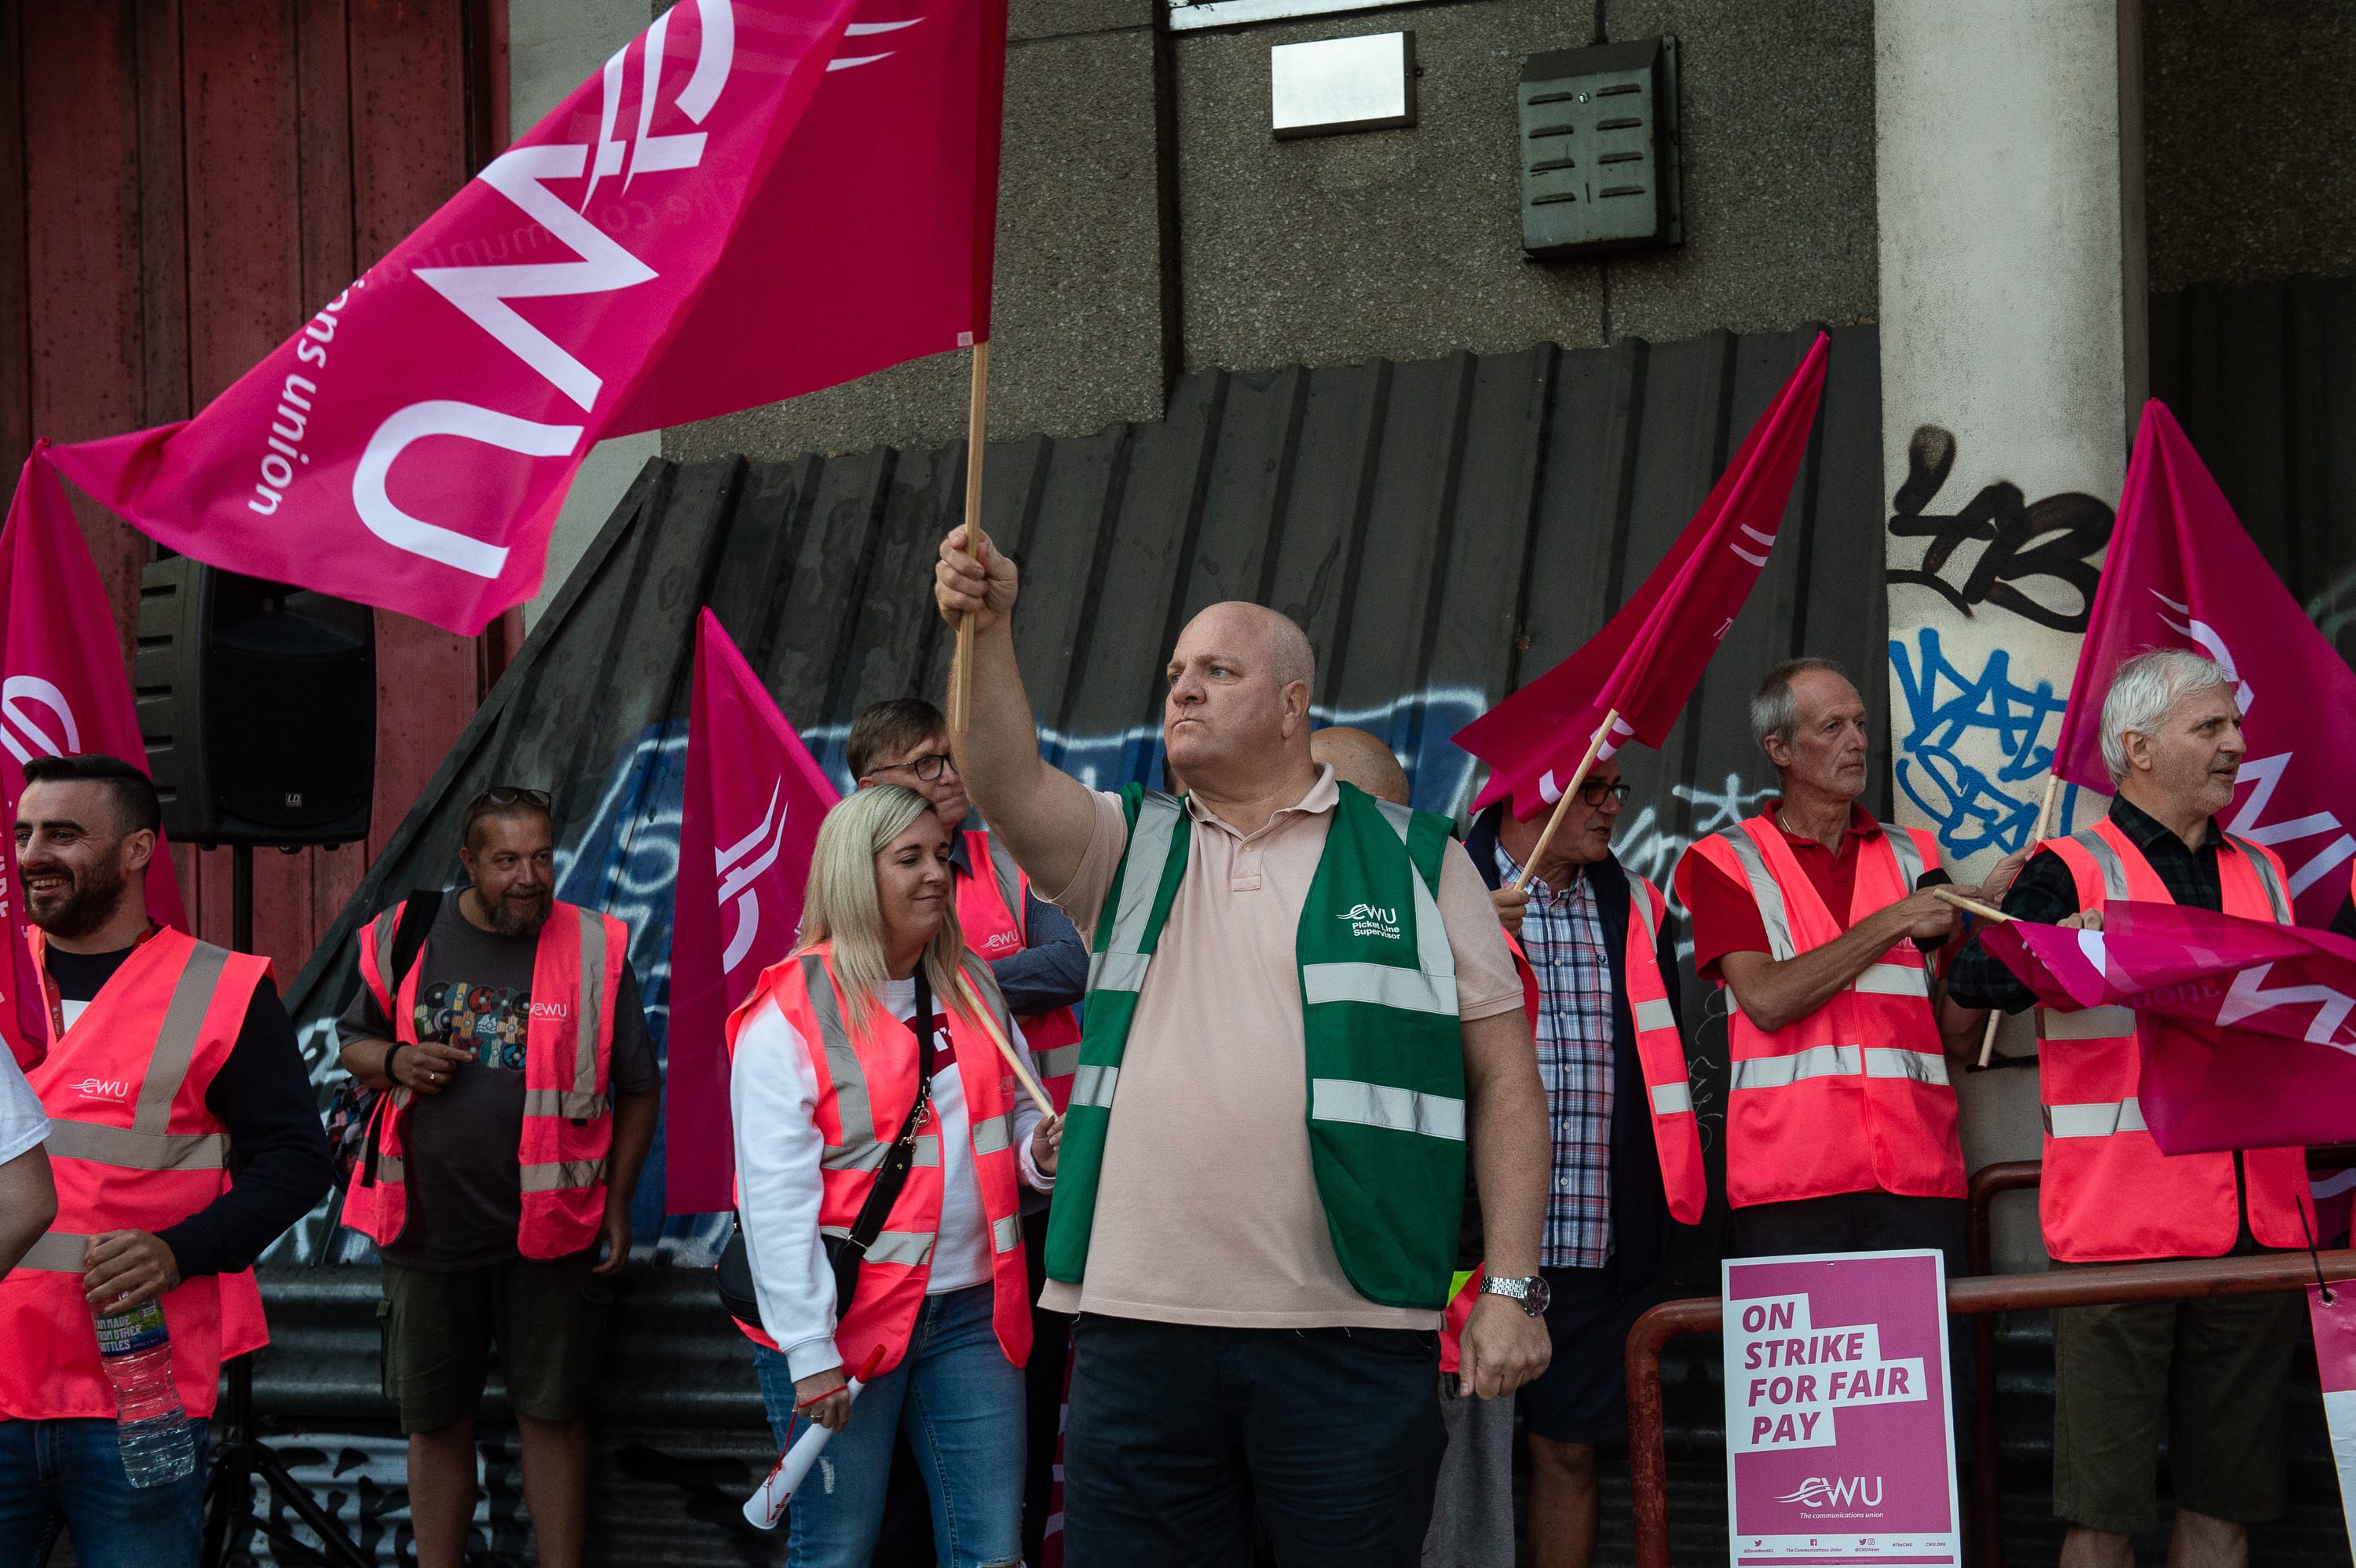 Royal Mail: Postal workers latest to strike as UK cost chaos continues